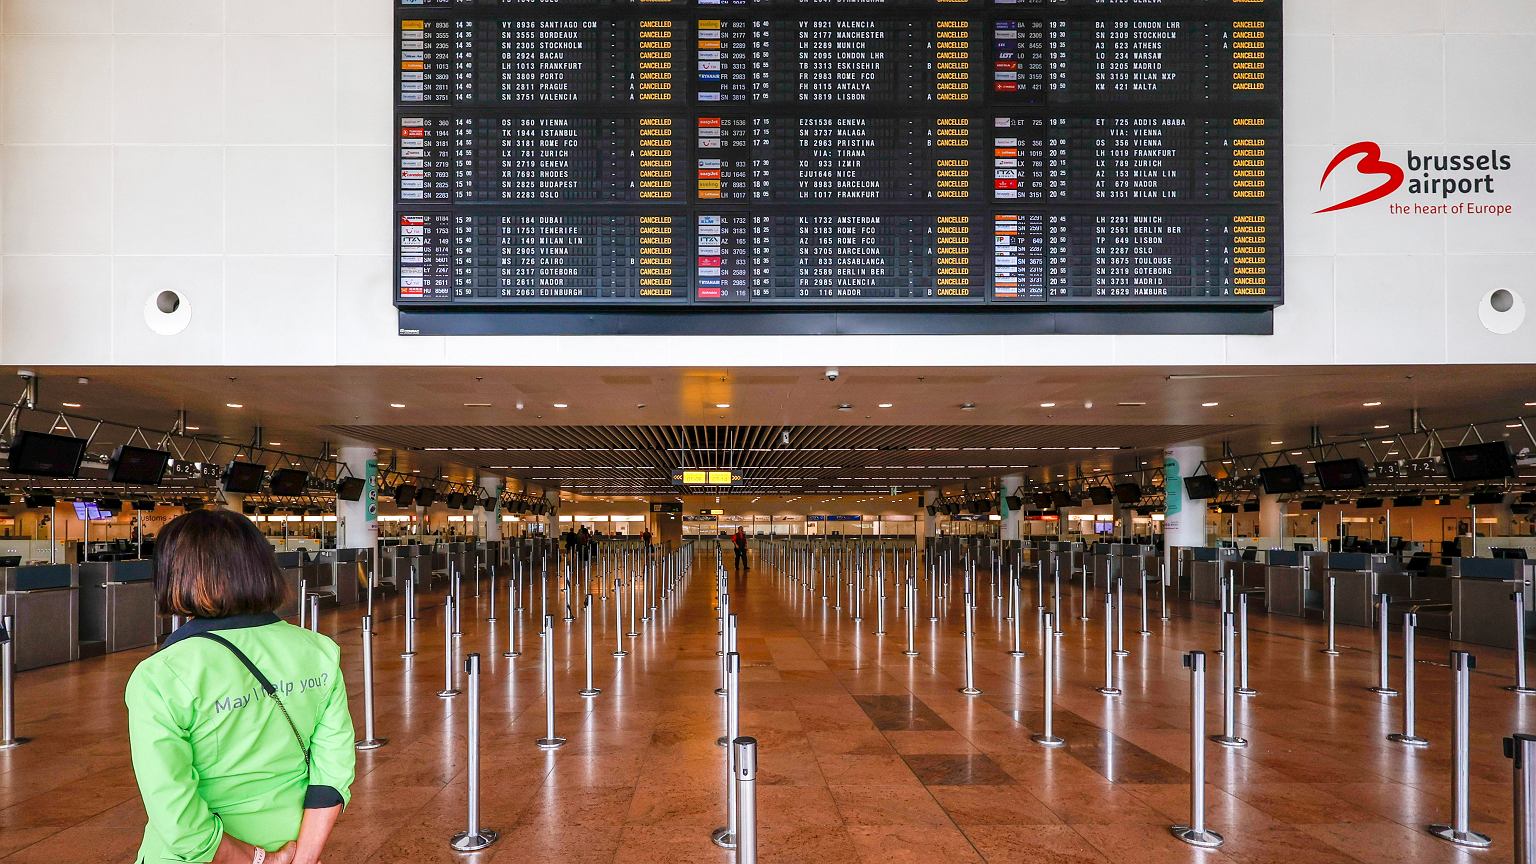 The crisis is deepening in the airline industry.  Brussels Airlines and Scandinavian SAS cancel flights during the holidays